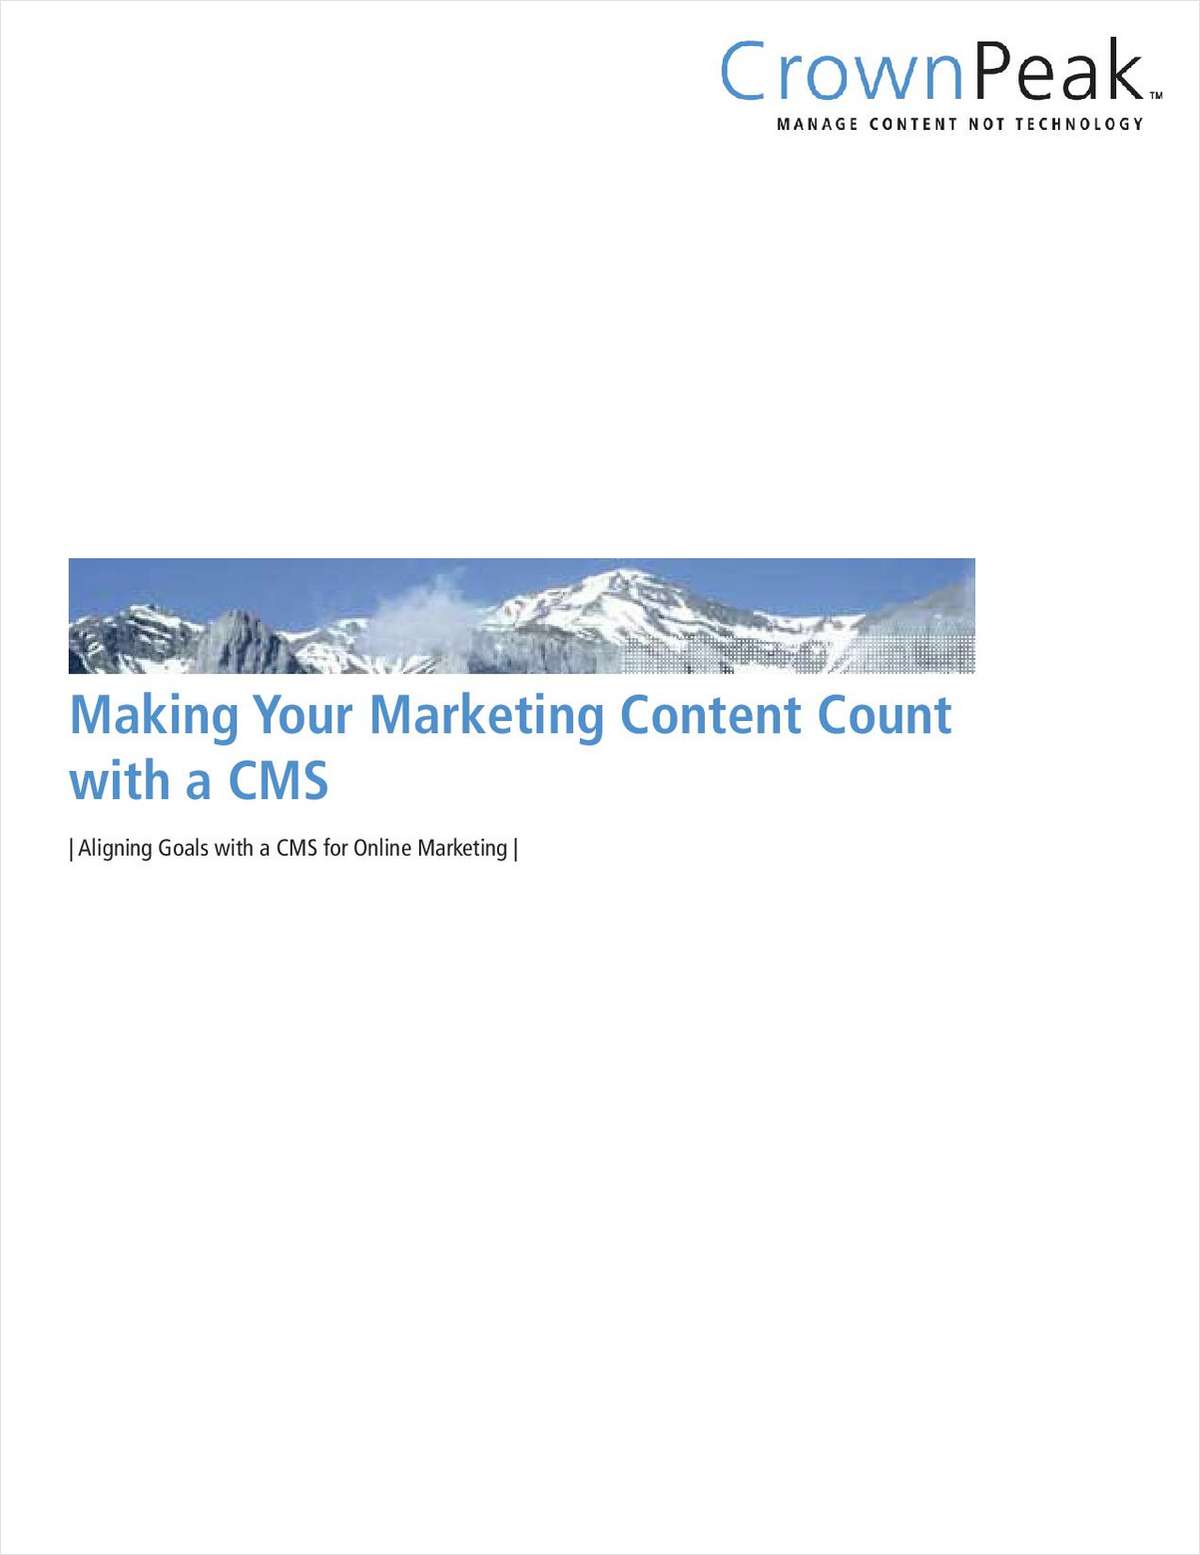 Making Your Marketing Content Count with a CMS